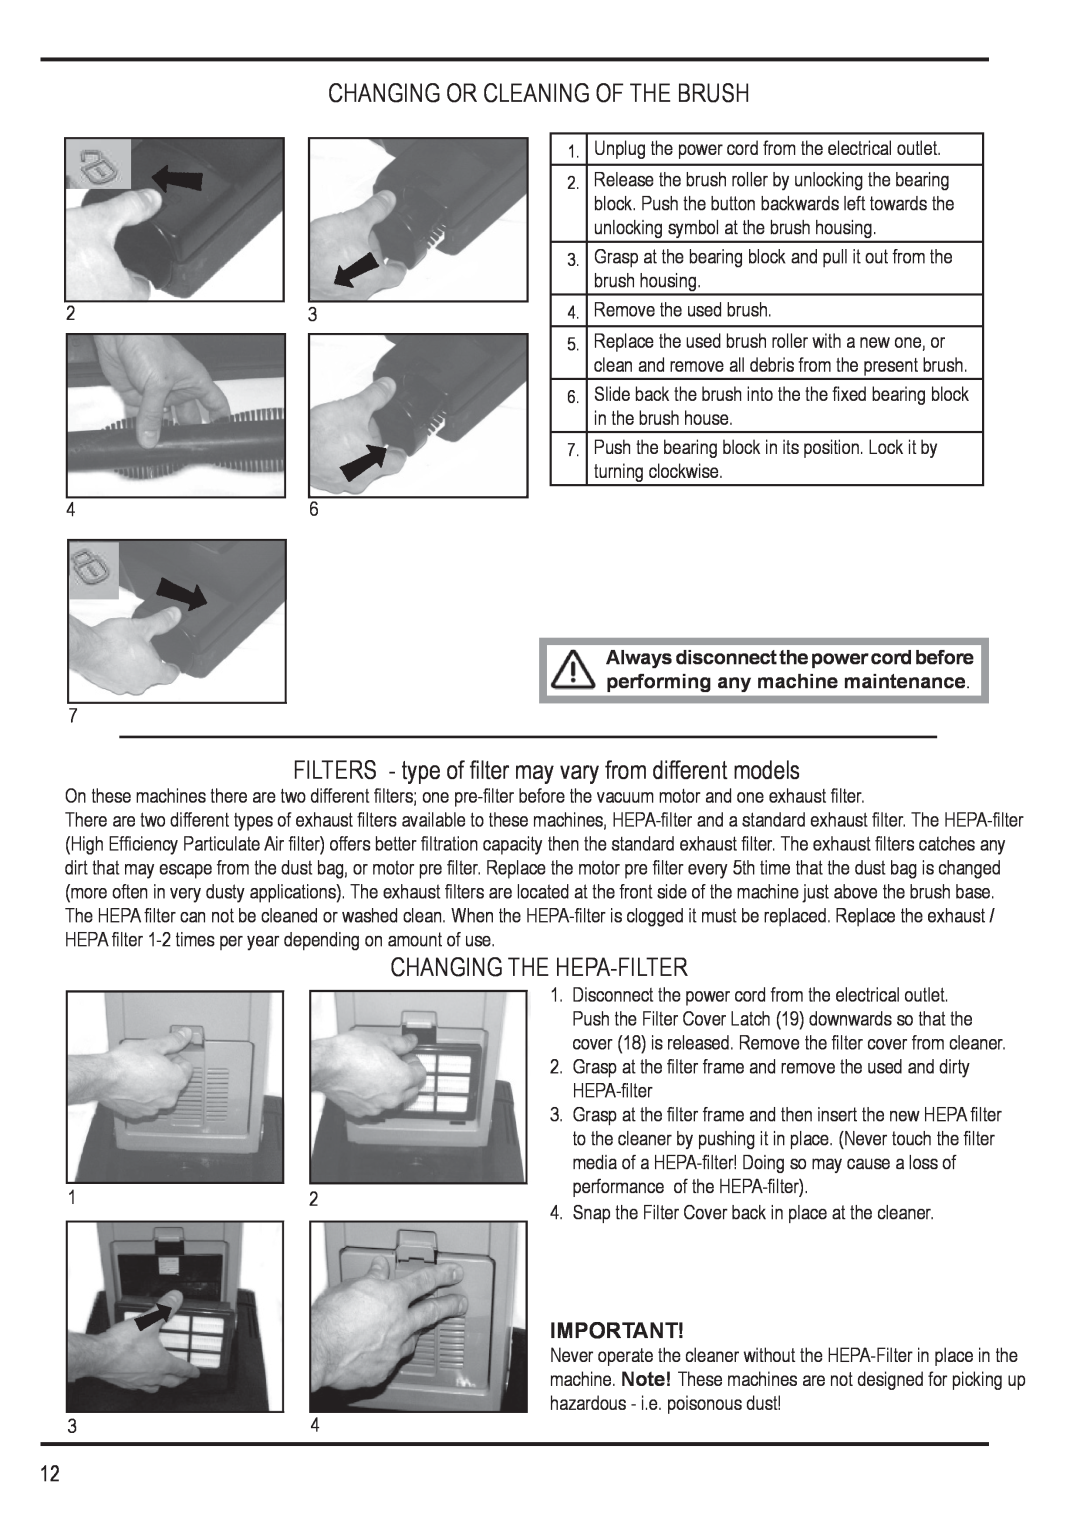 Nilfisk-Advance America 12H manual Changing Or Cleaning Of The Brush, Changing The Hepa-Filter 